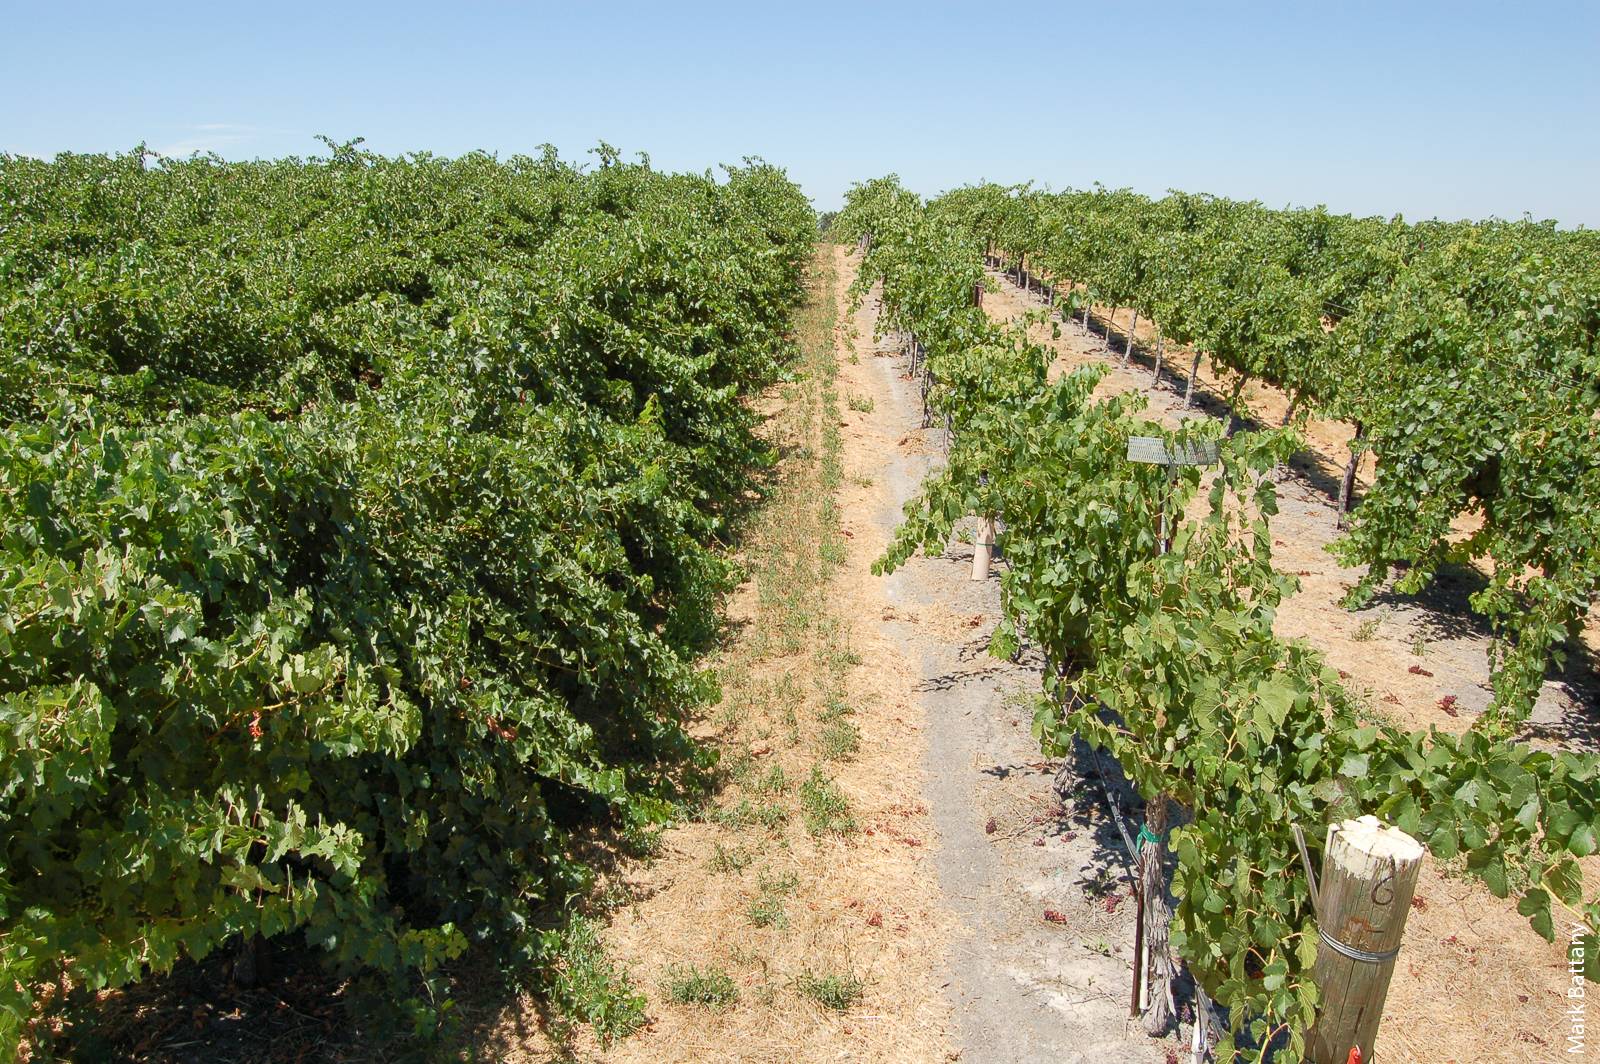 Different production styles and goals — producing high tonnages of fruit per acre versus higher quality crops at lower tonnages per acre — result in vineyards that have very different canopy sizes and, therefore, different irrigation water requirements. The block on the left, for example, has a large amount of foliage and will need more irrigation than the block on the right.